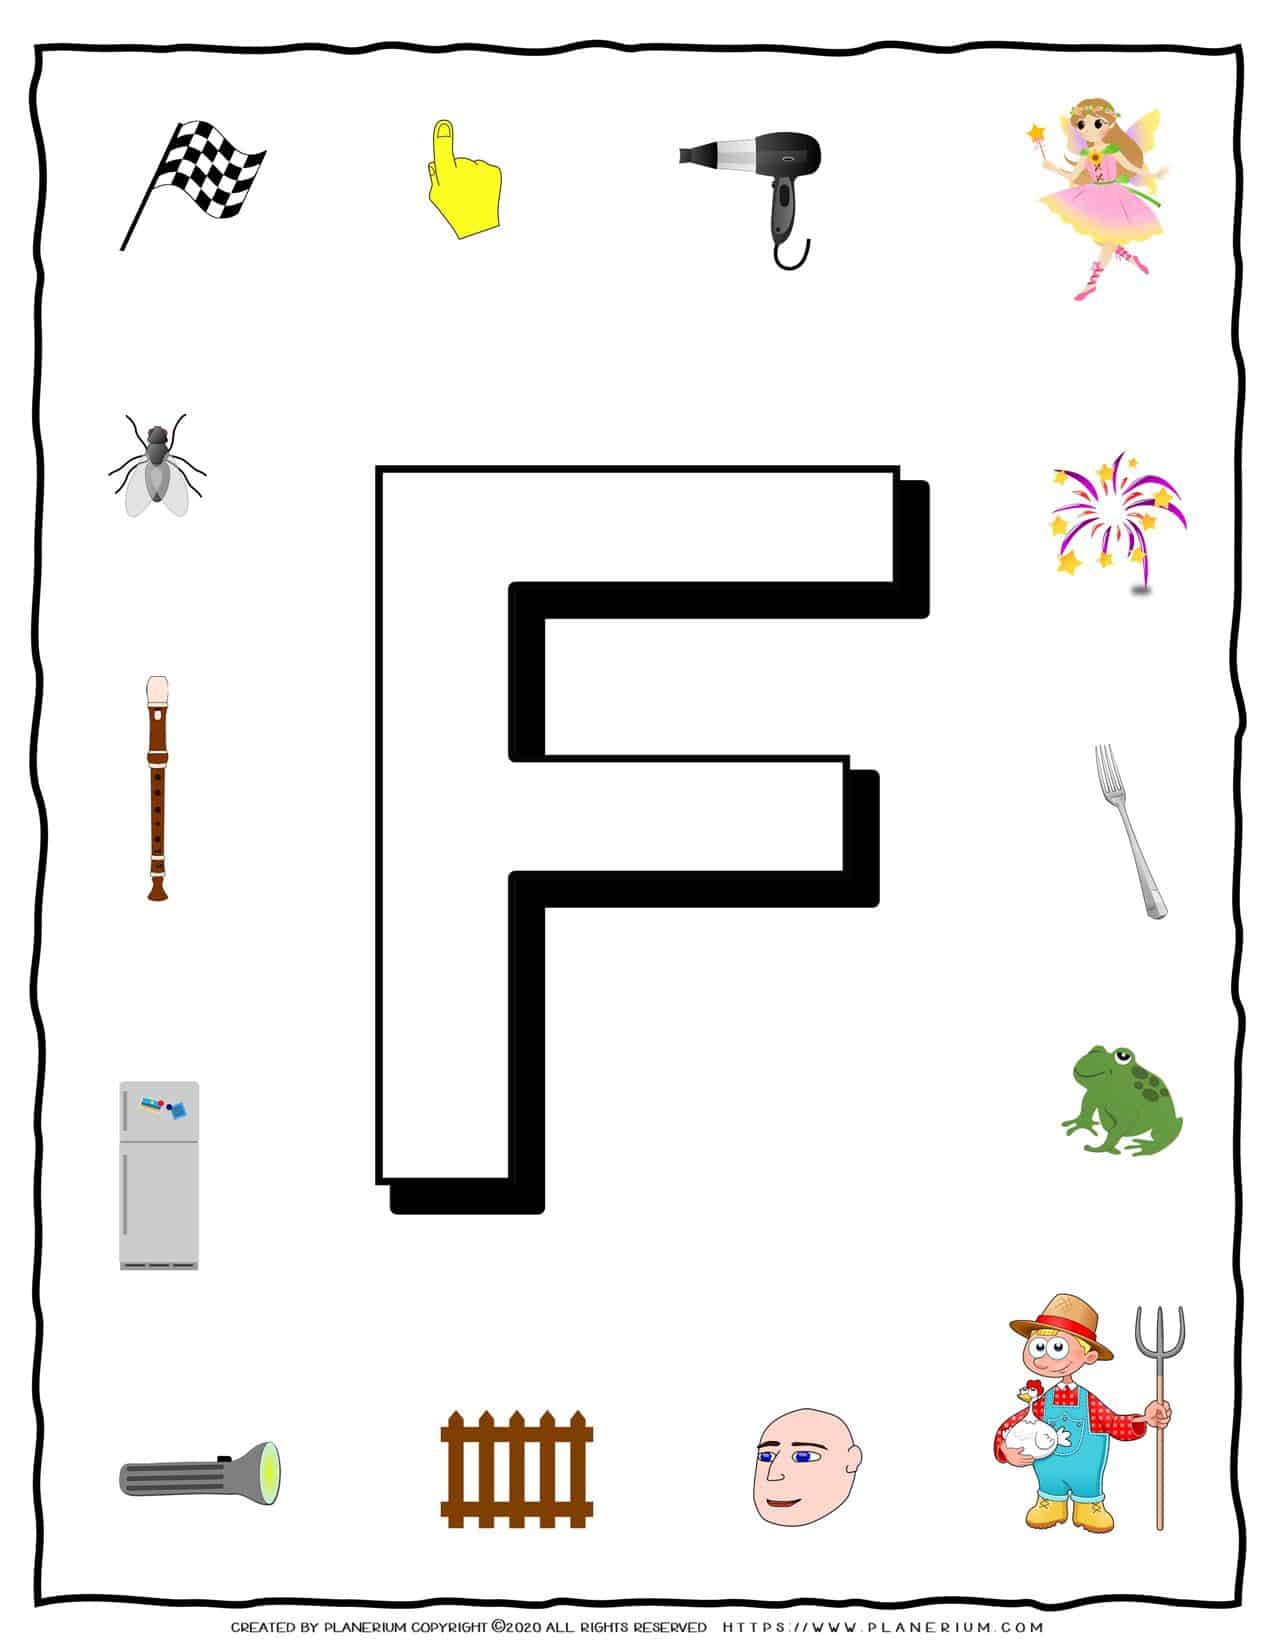 English Alphabet - Objects that starts with F | Planerium